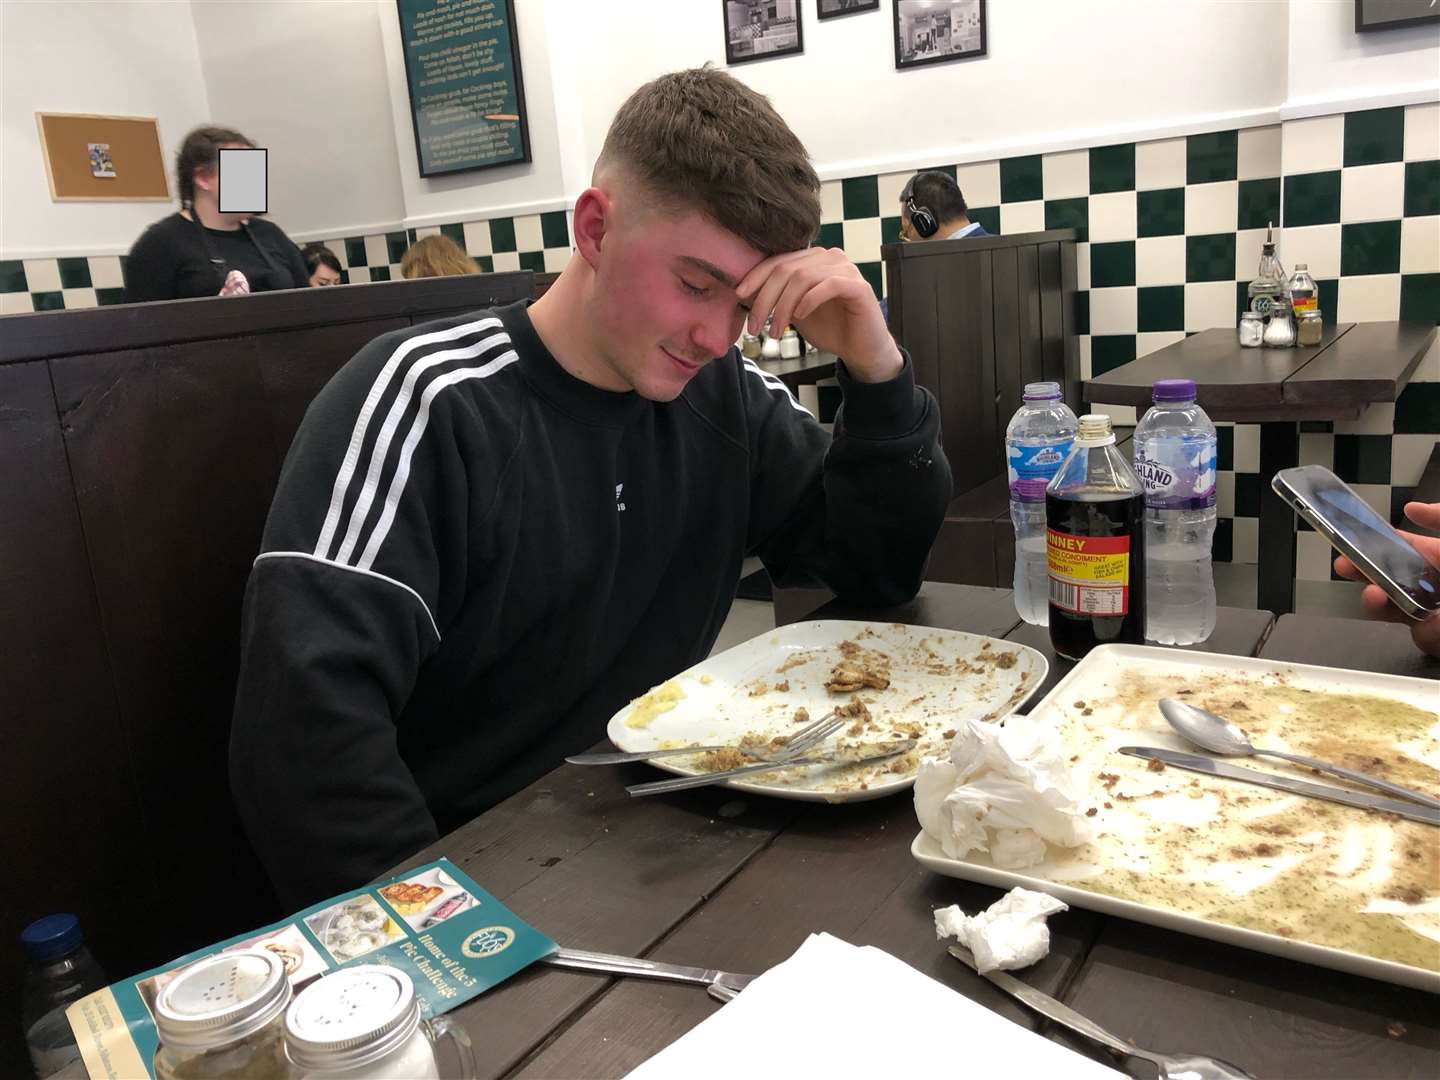 A broken man as I fail the challenge by just one bite